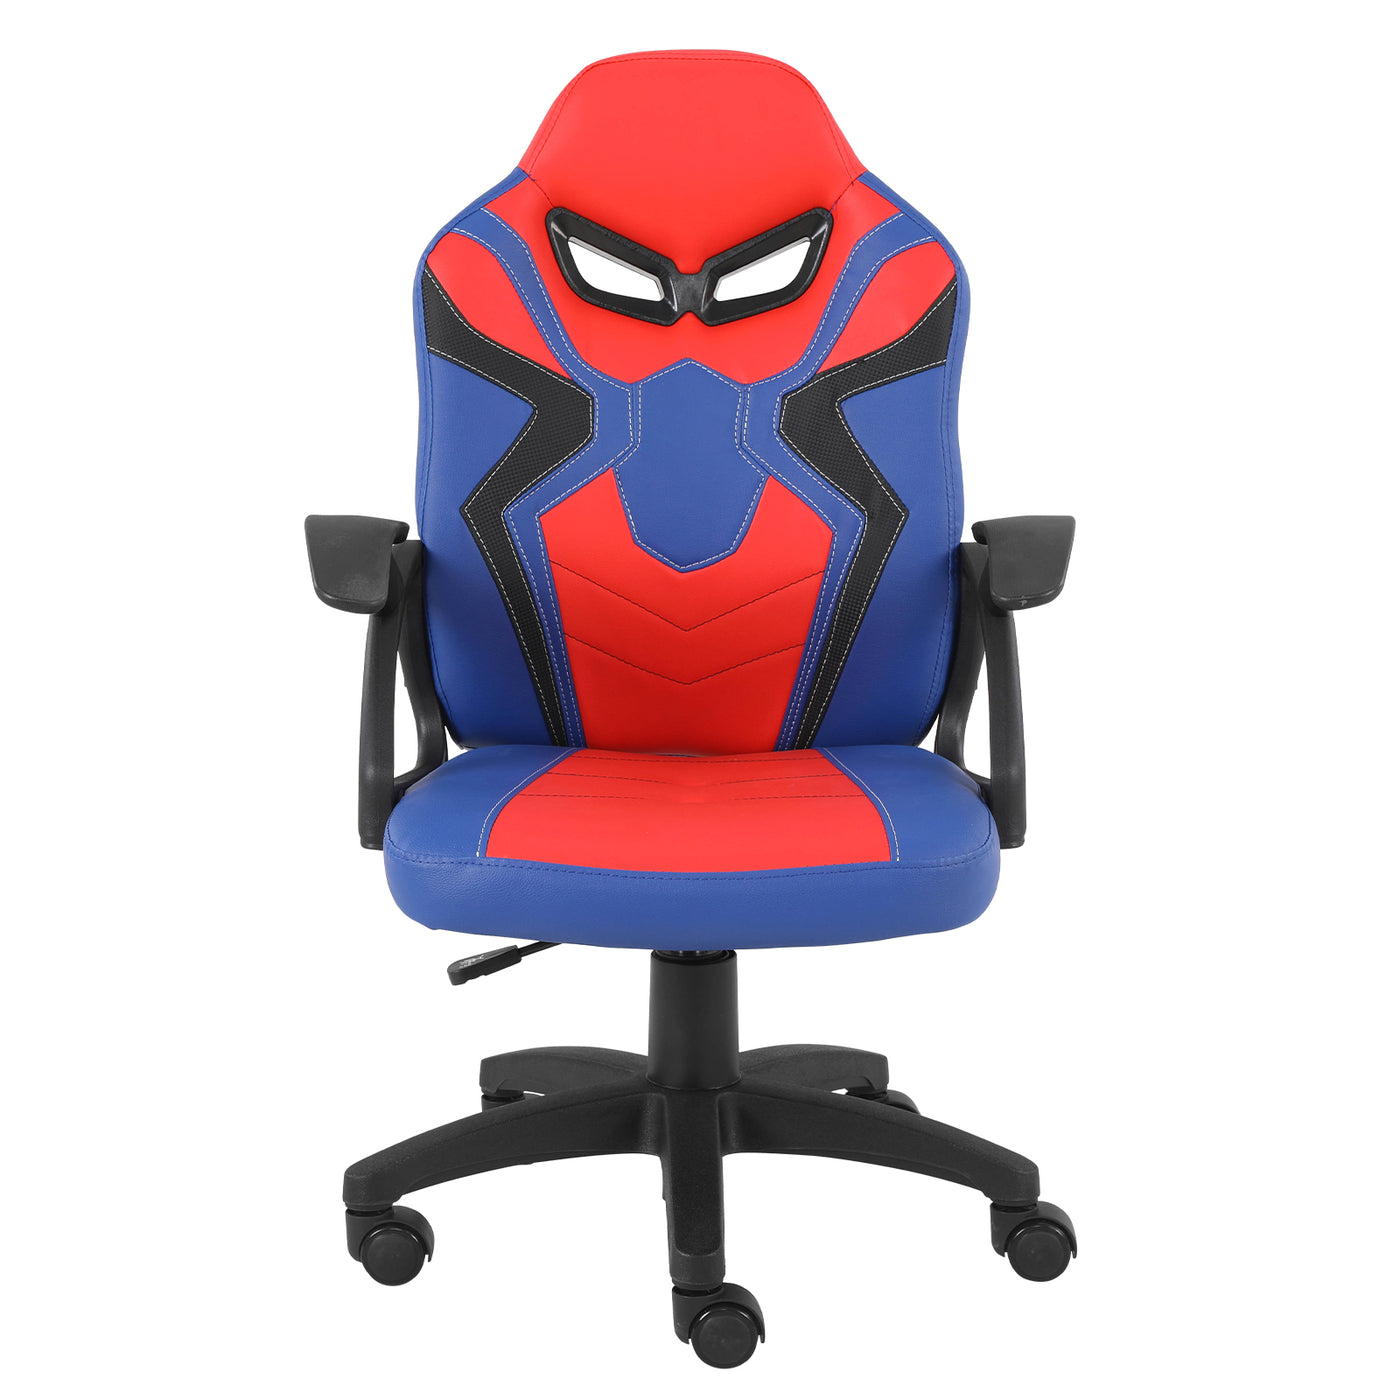 Kids Teens Computer Gaming Chair with Footrest Adjustable Recliner Swivel Chair